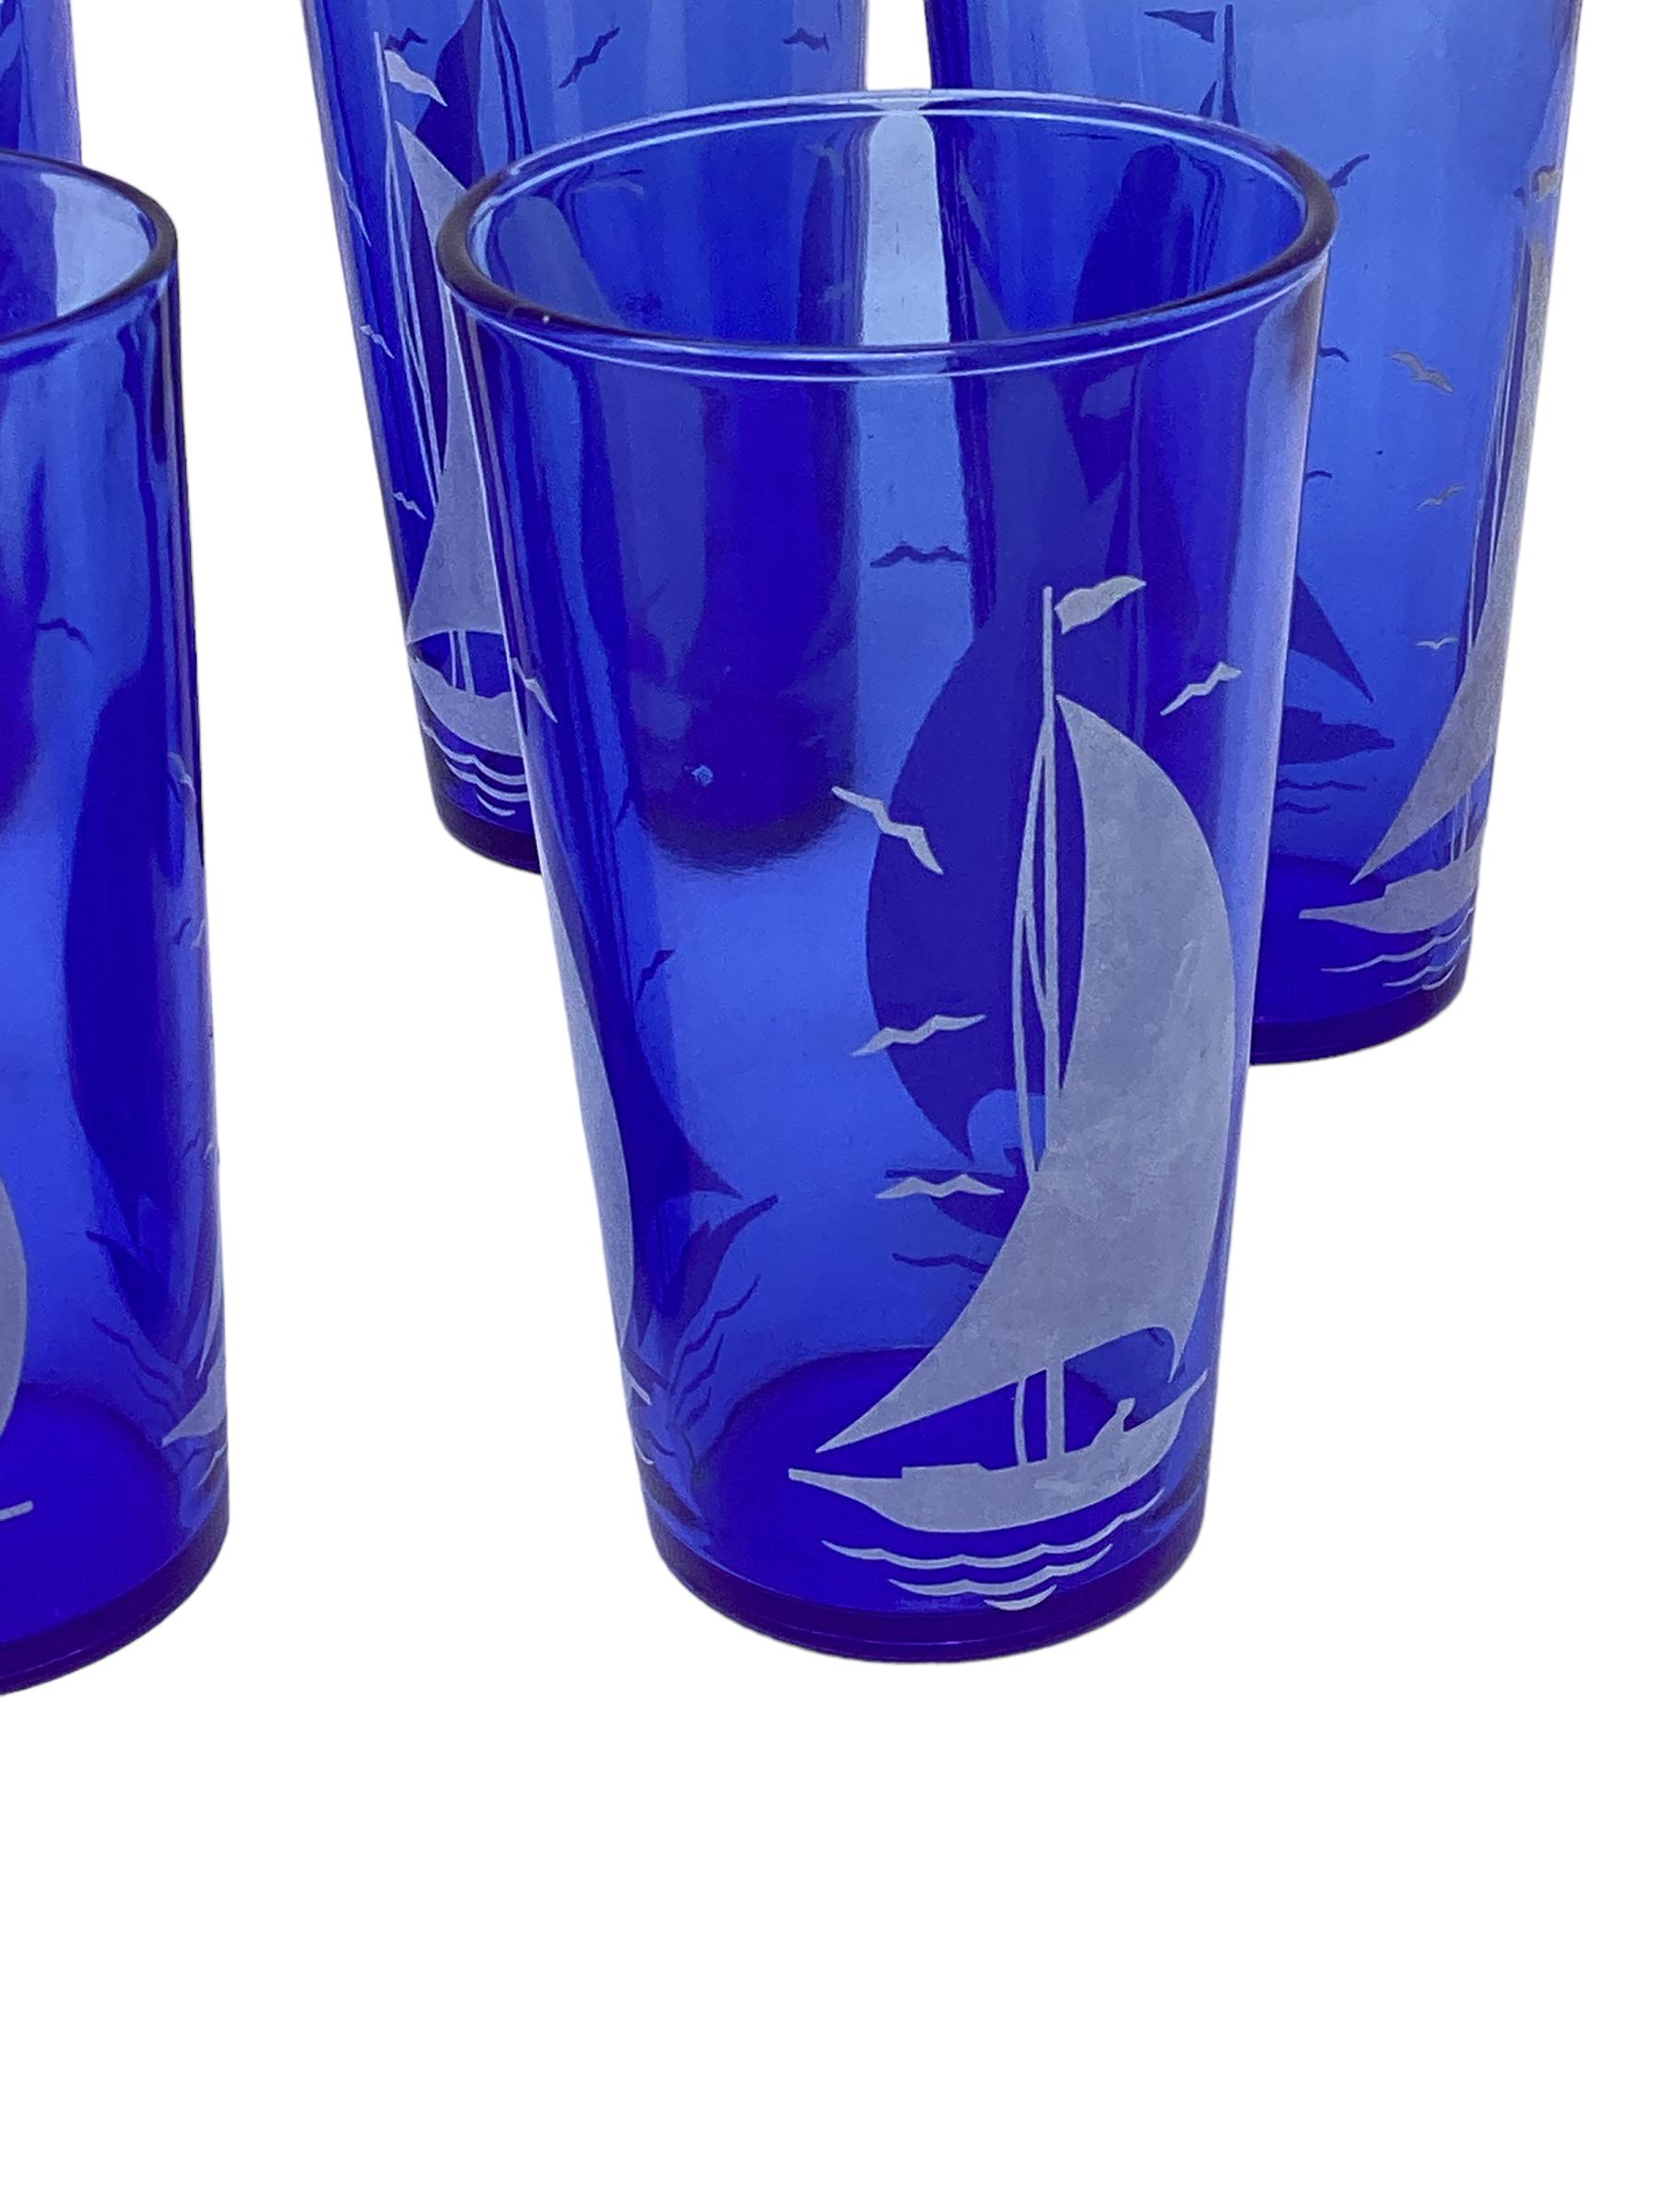 Set of 6 Hazel-Atlas Art Deco Cobalt Tumblers with White Sailboats In Good Condition For Sale In Chapel Hill, NC